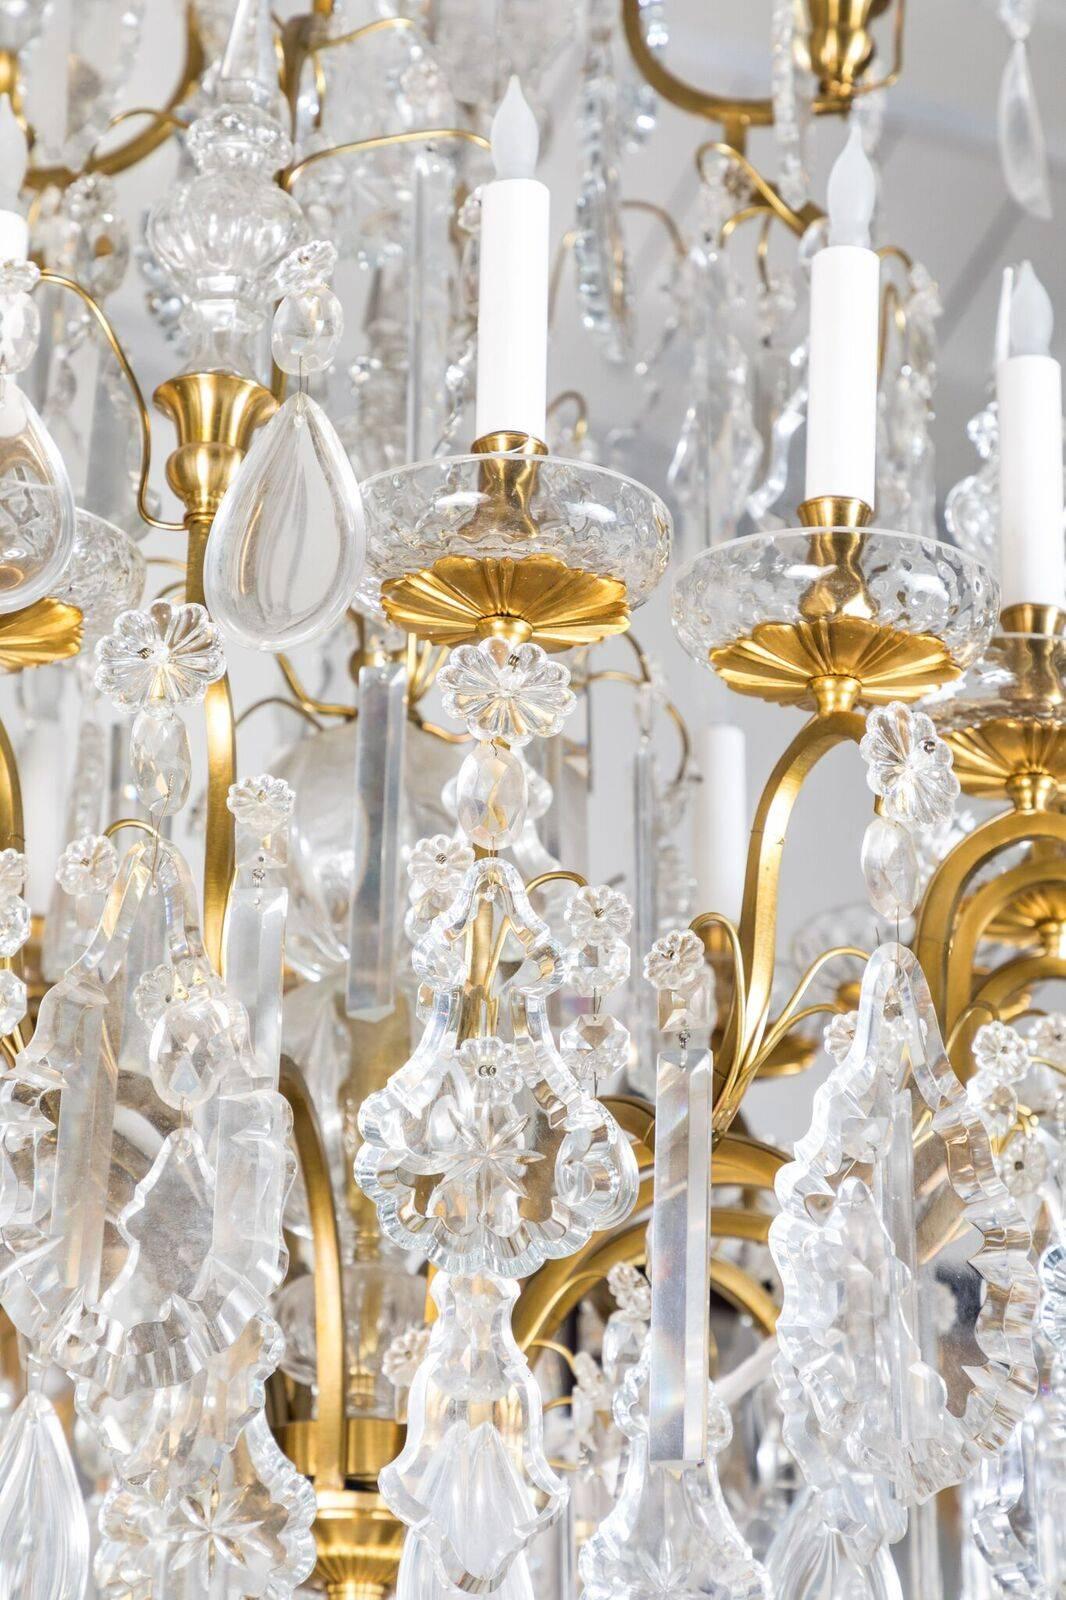 Mid-20th Century Lush, Louis XIV Style Chandelier For Sale